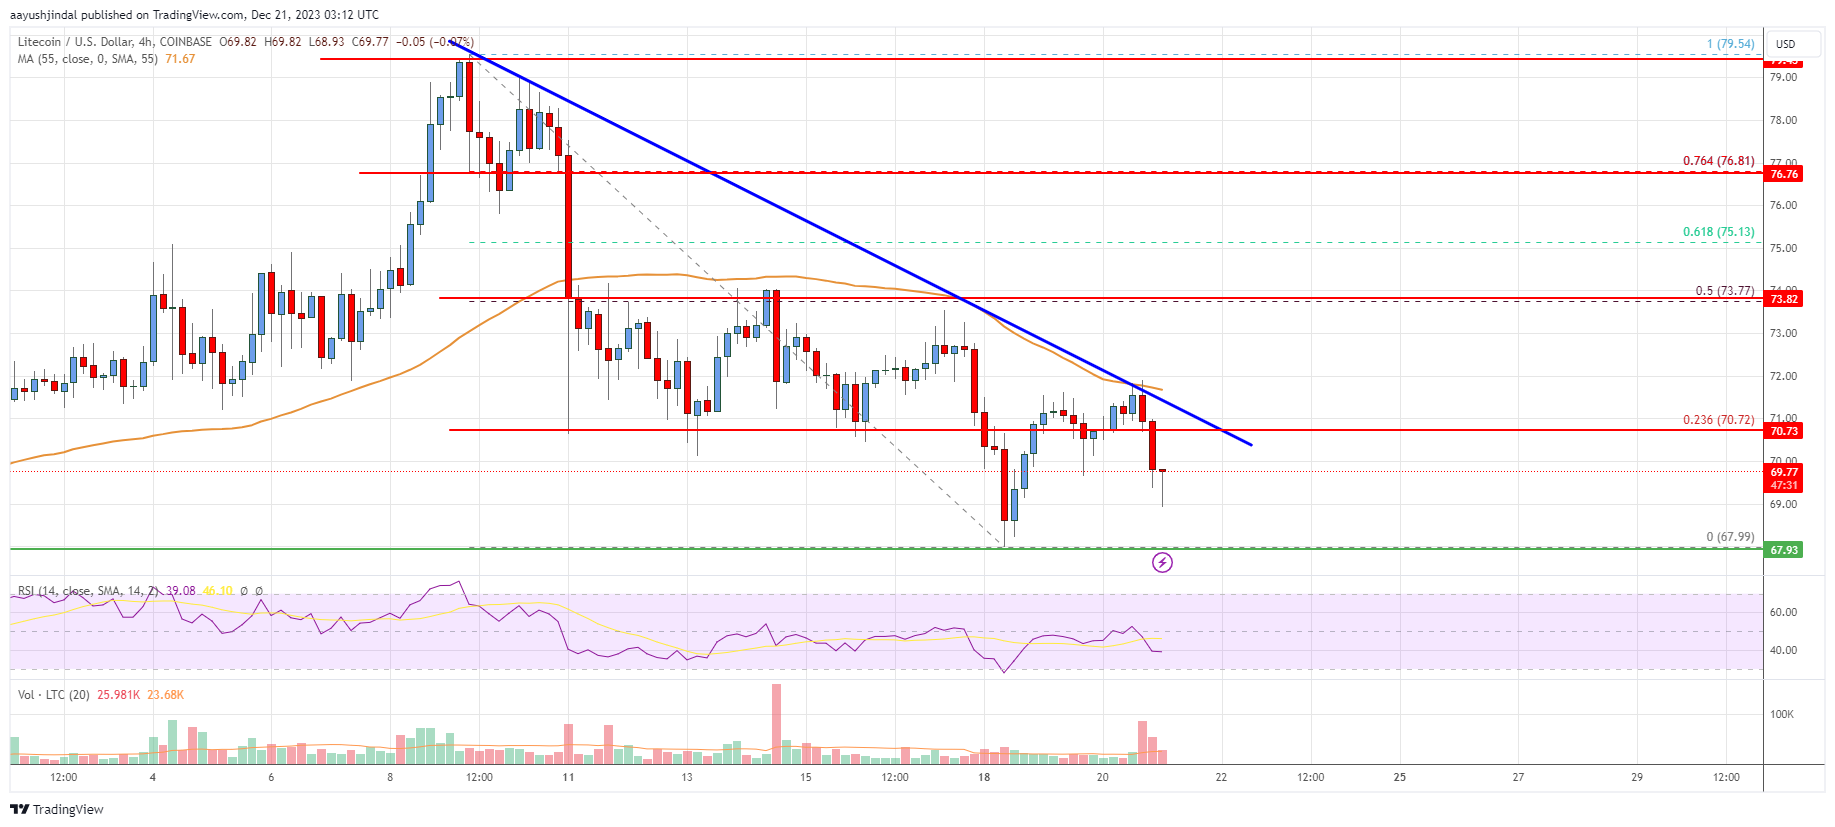 Litecoin (LTC) Price Analysis: Can Bulls Protect This Key Support | Live Bitcoin News